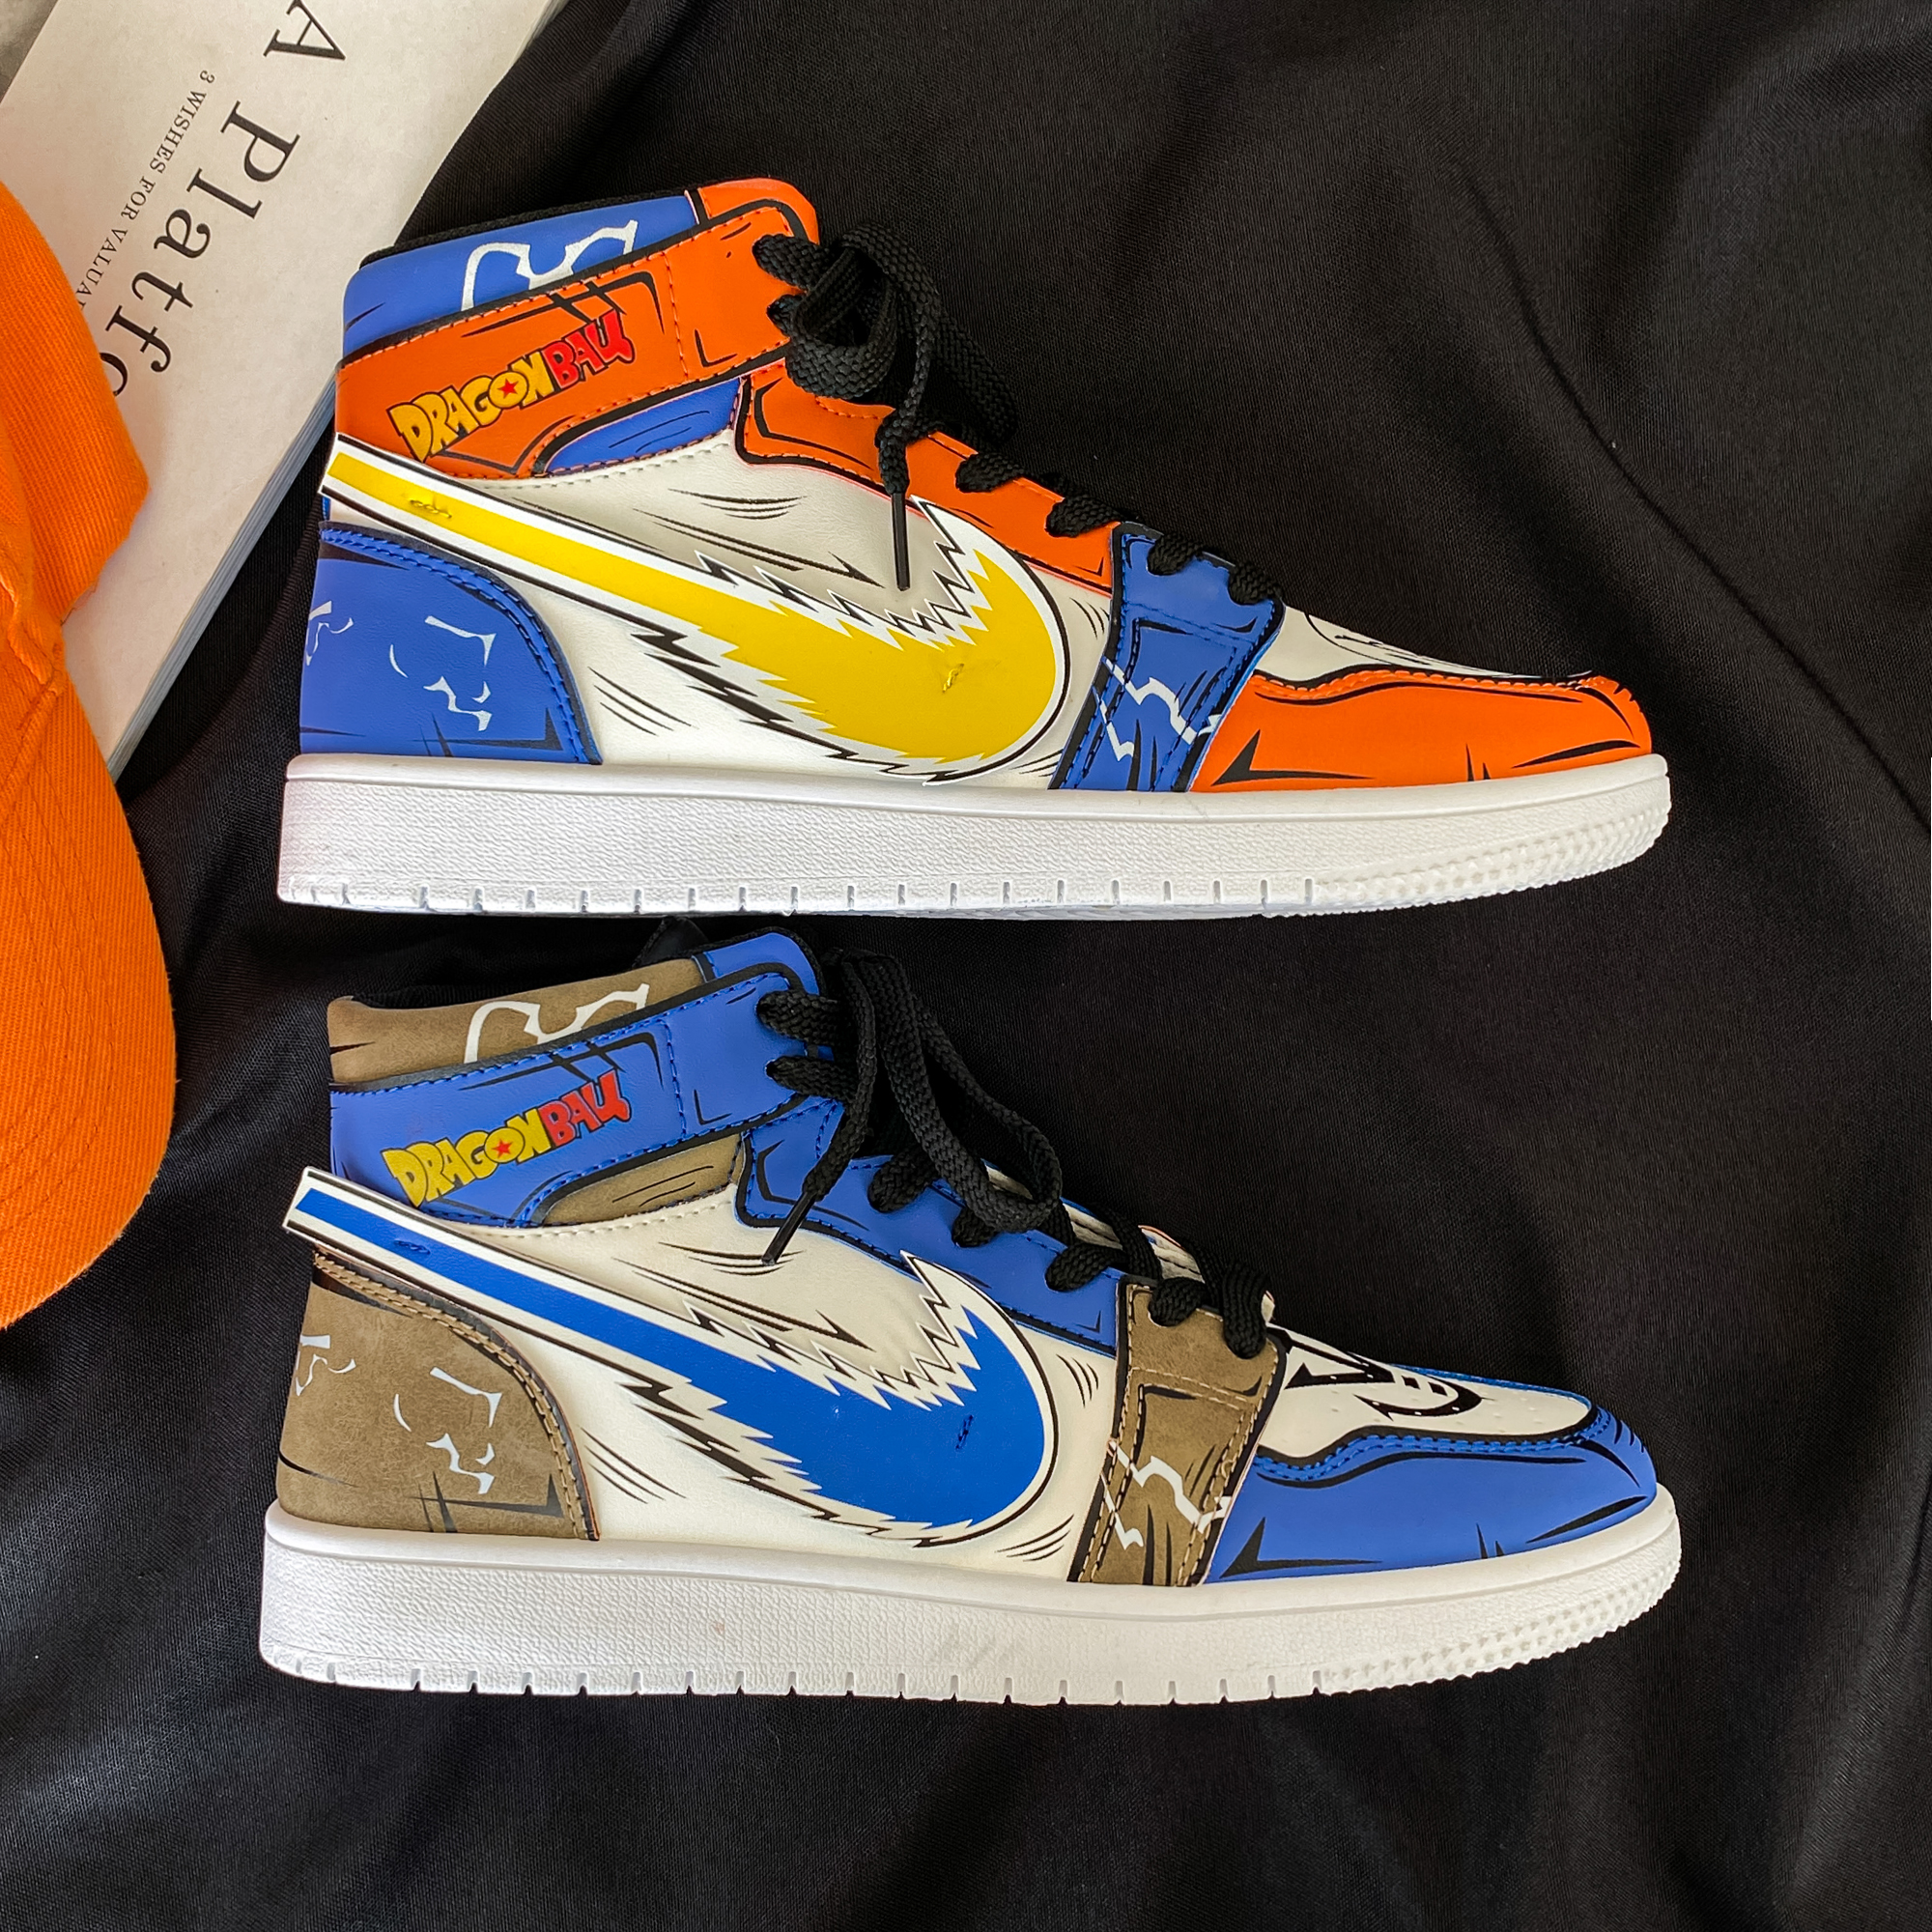 Dragon Ball – Goku and Vegeta Themed Amazing Shoes (2 Designs) Shoes & Slippers